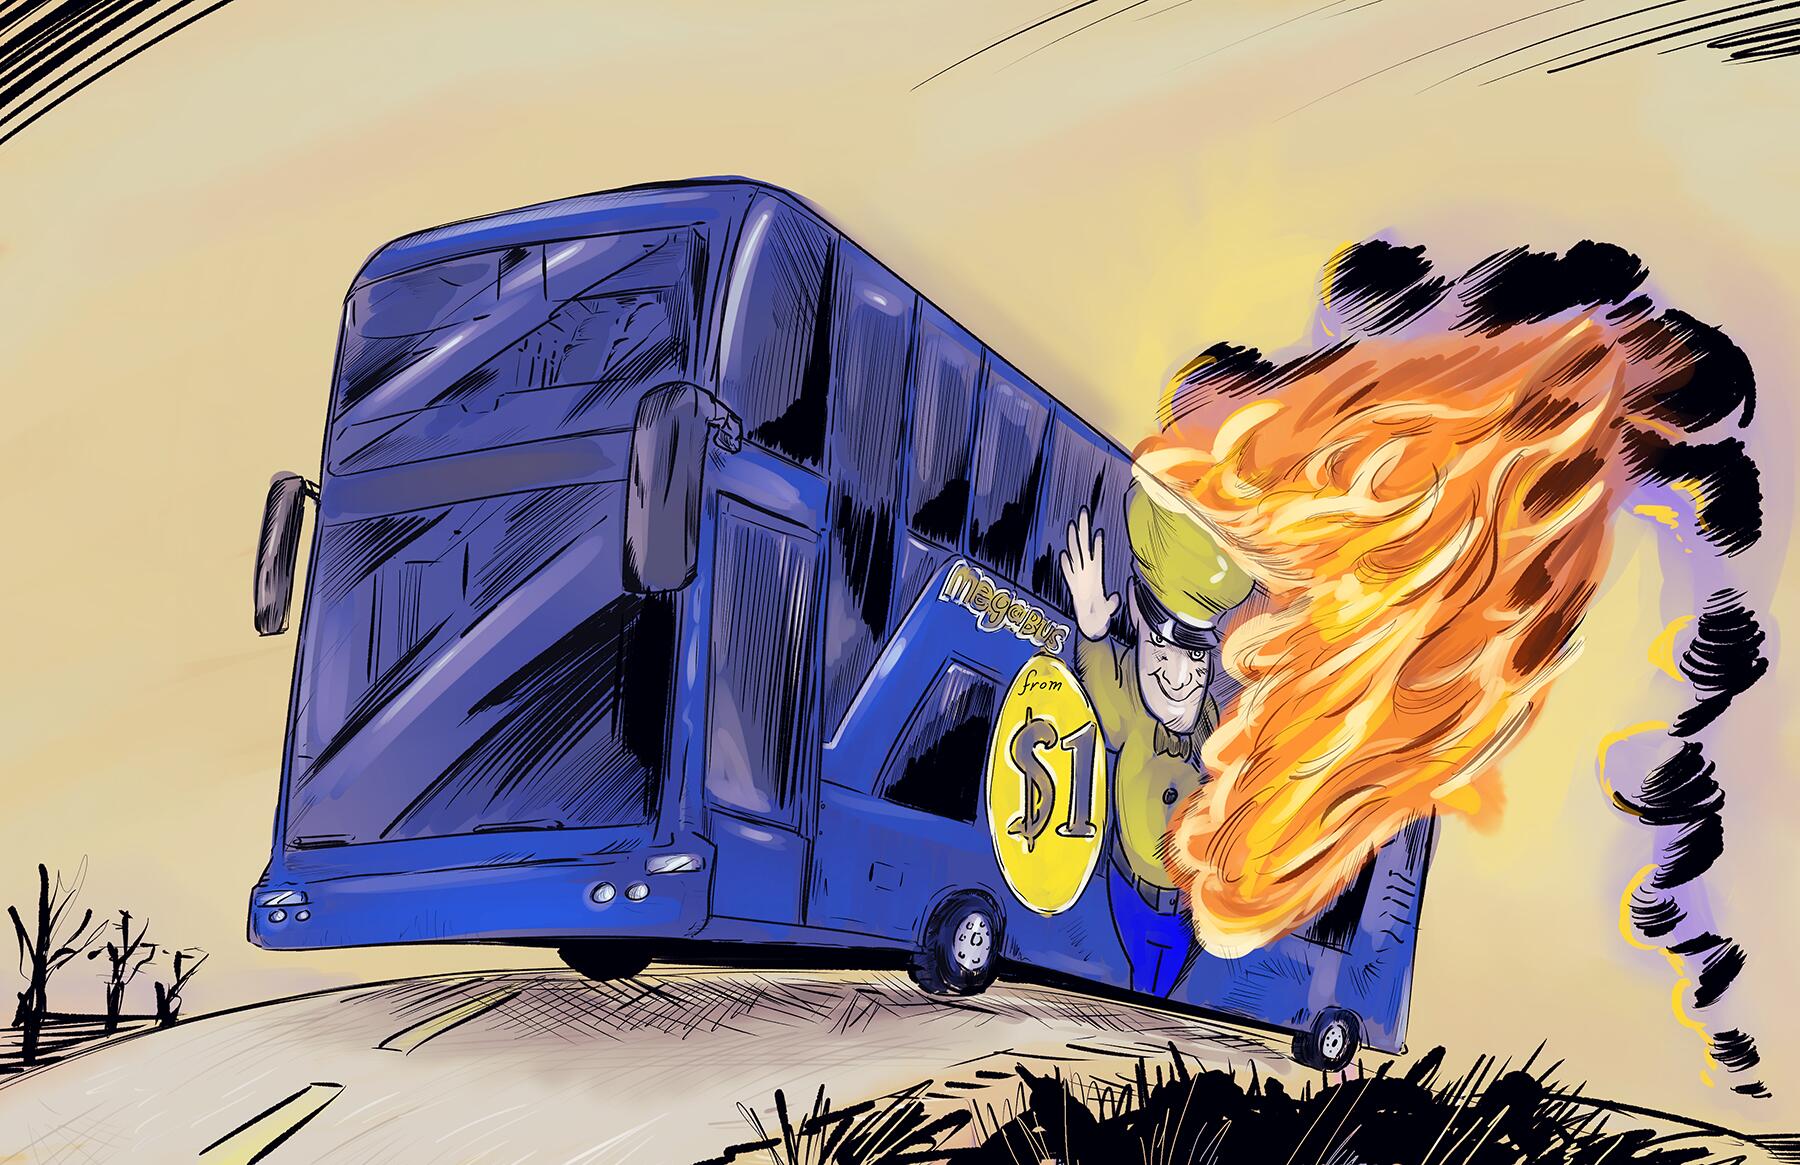 Should You Ride the Megabus? Probably Not. But if You Must, Know This.